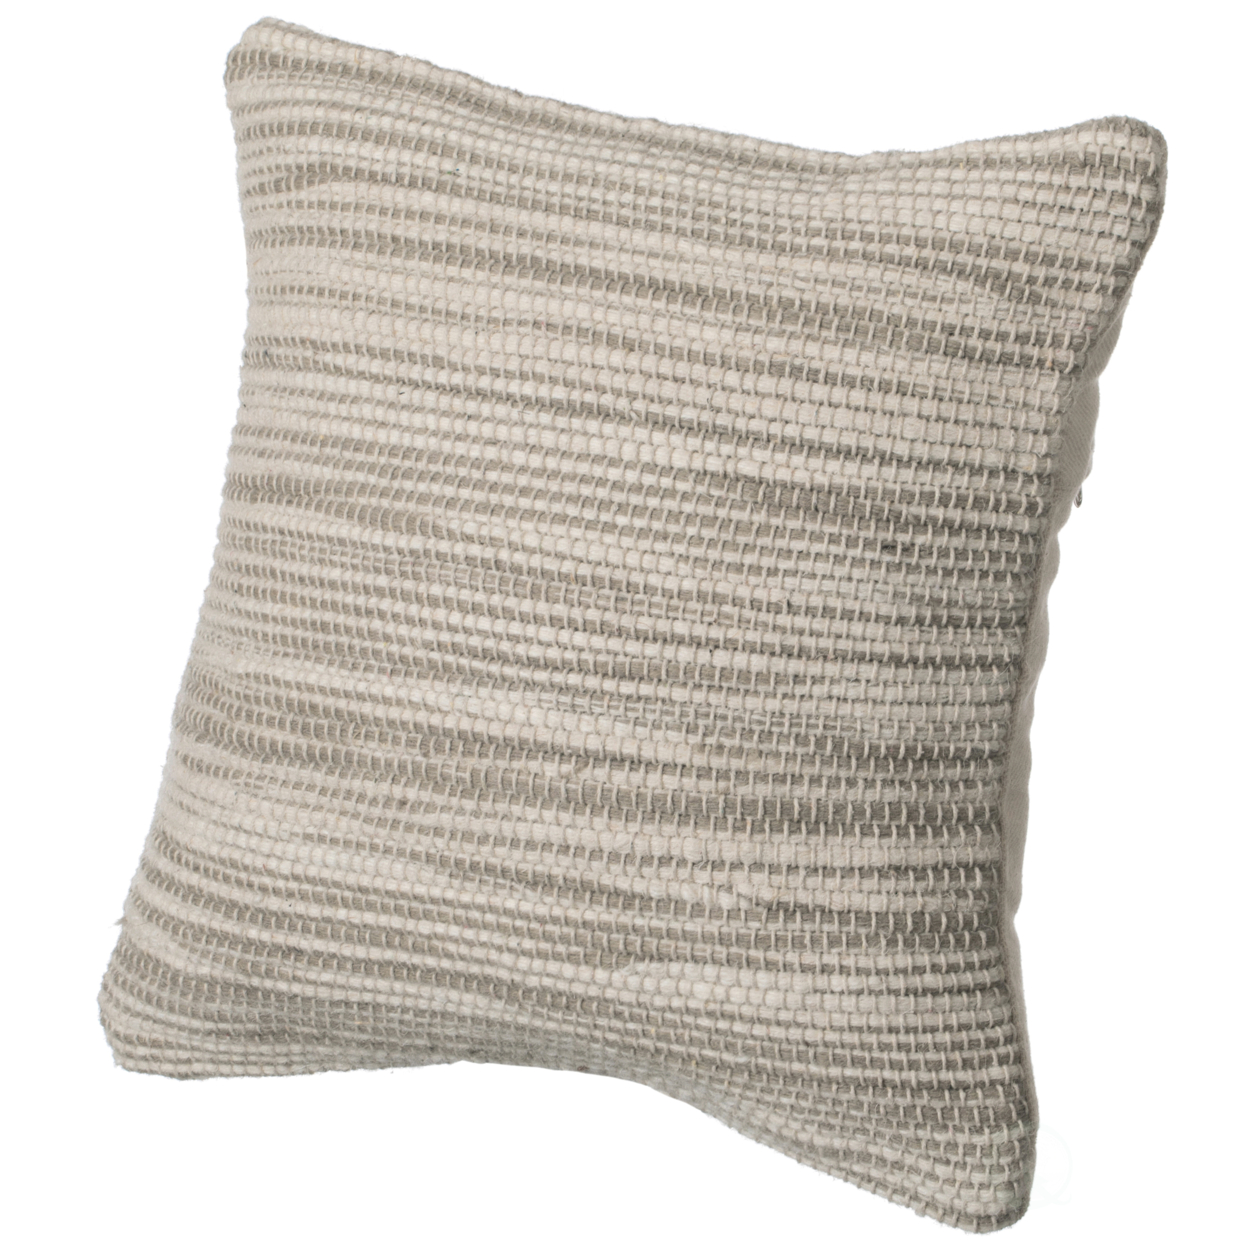 16 Handwoven Wool & Cotton Throw Pillow Cover With Woven Knit Texture - Sand